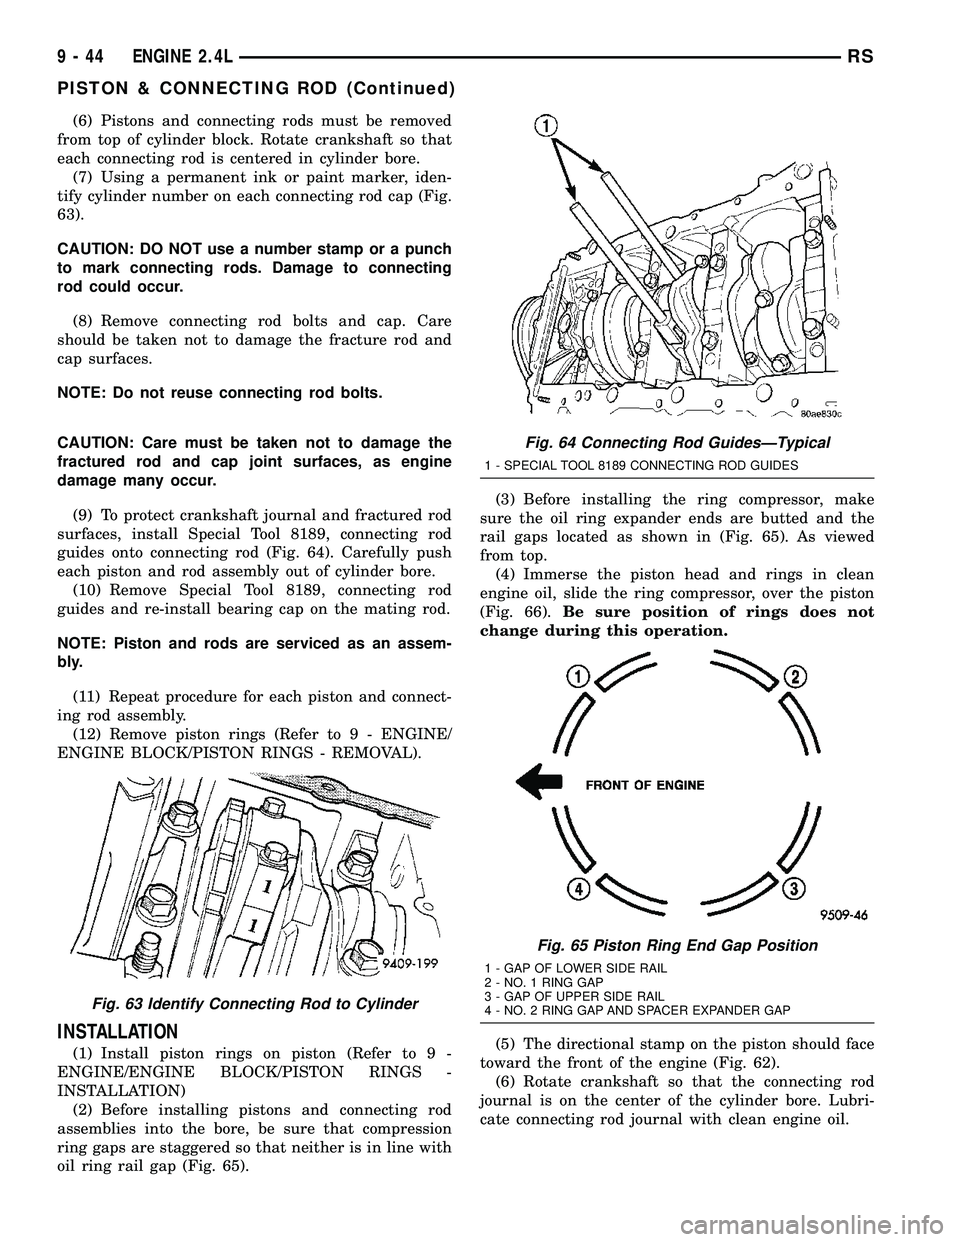 CHRYSLER VOYAGER 2004  Service Manual (6) Pistons and connecting rods must be removed
from top of cylinder block. Rotate crankshaft so that
each connecting rod is centered in cylinder bore.
(7) Using a permanent ink or paint marker, iden-